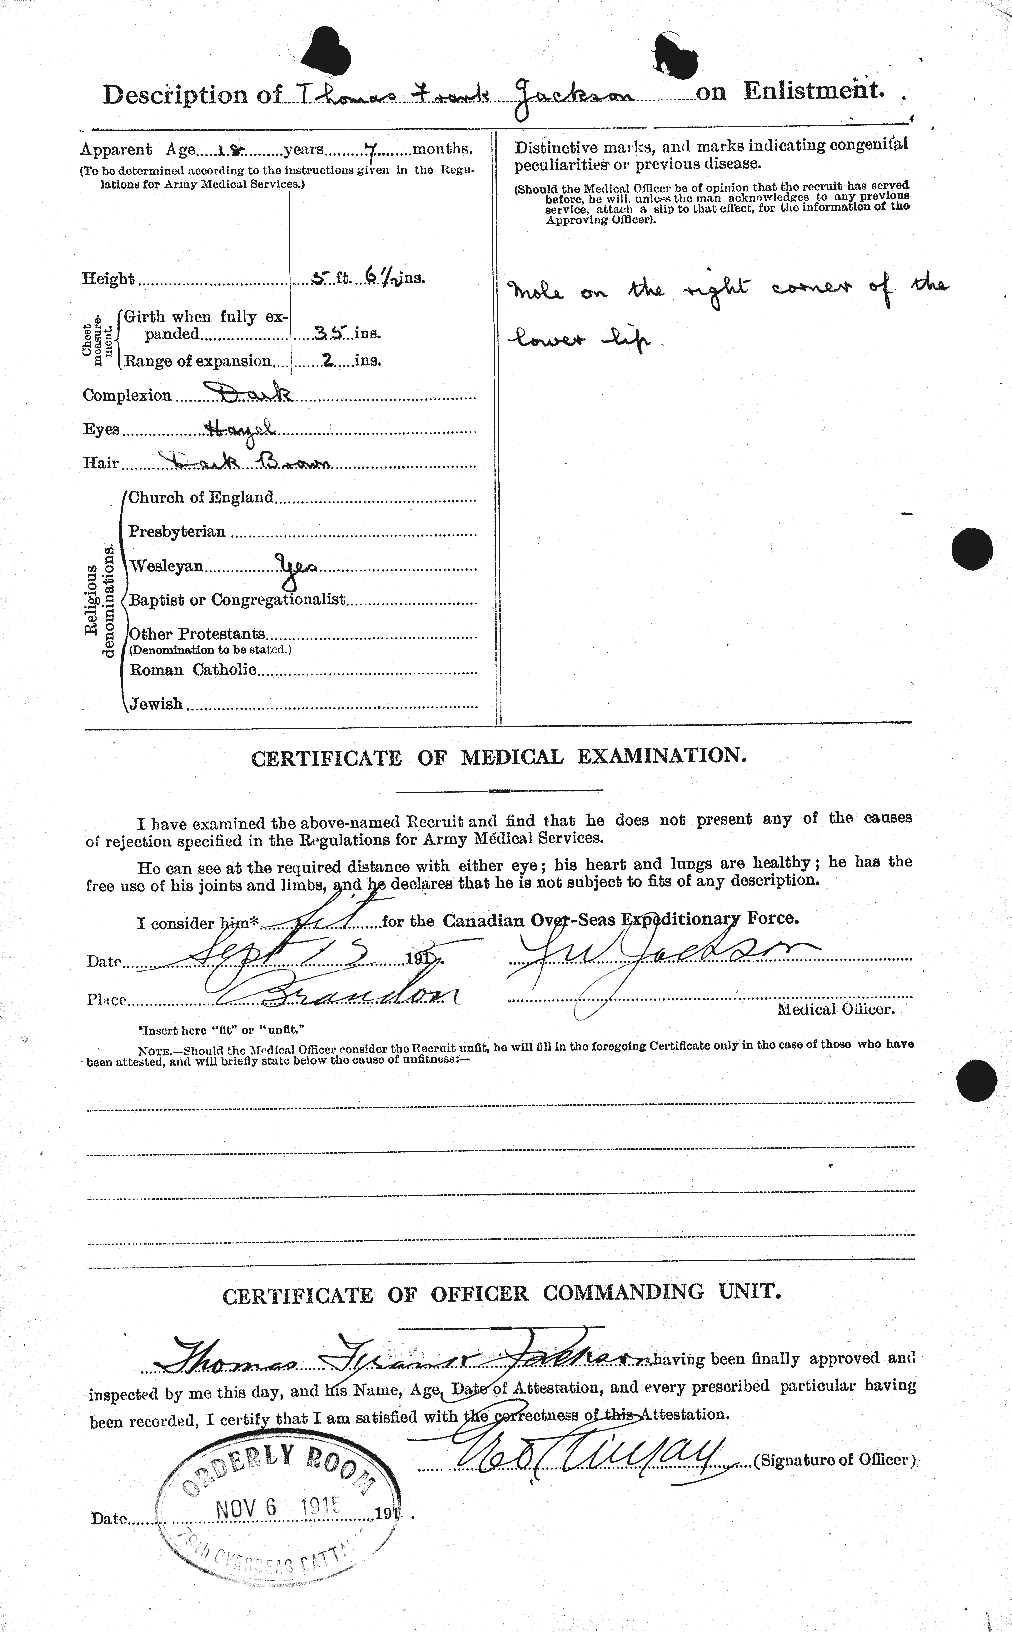 Personnel Records of the First World War - CEF 412326b